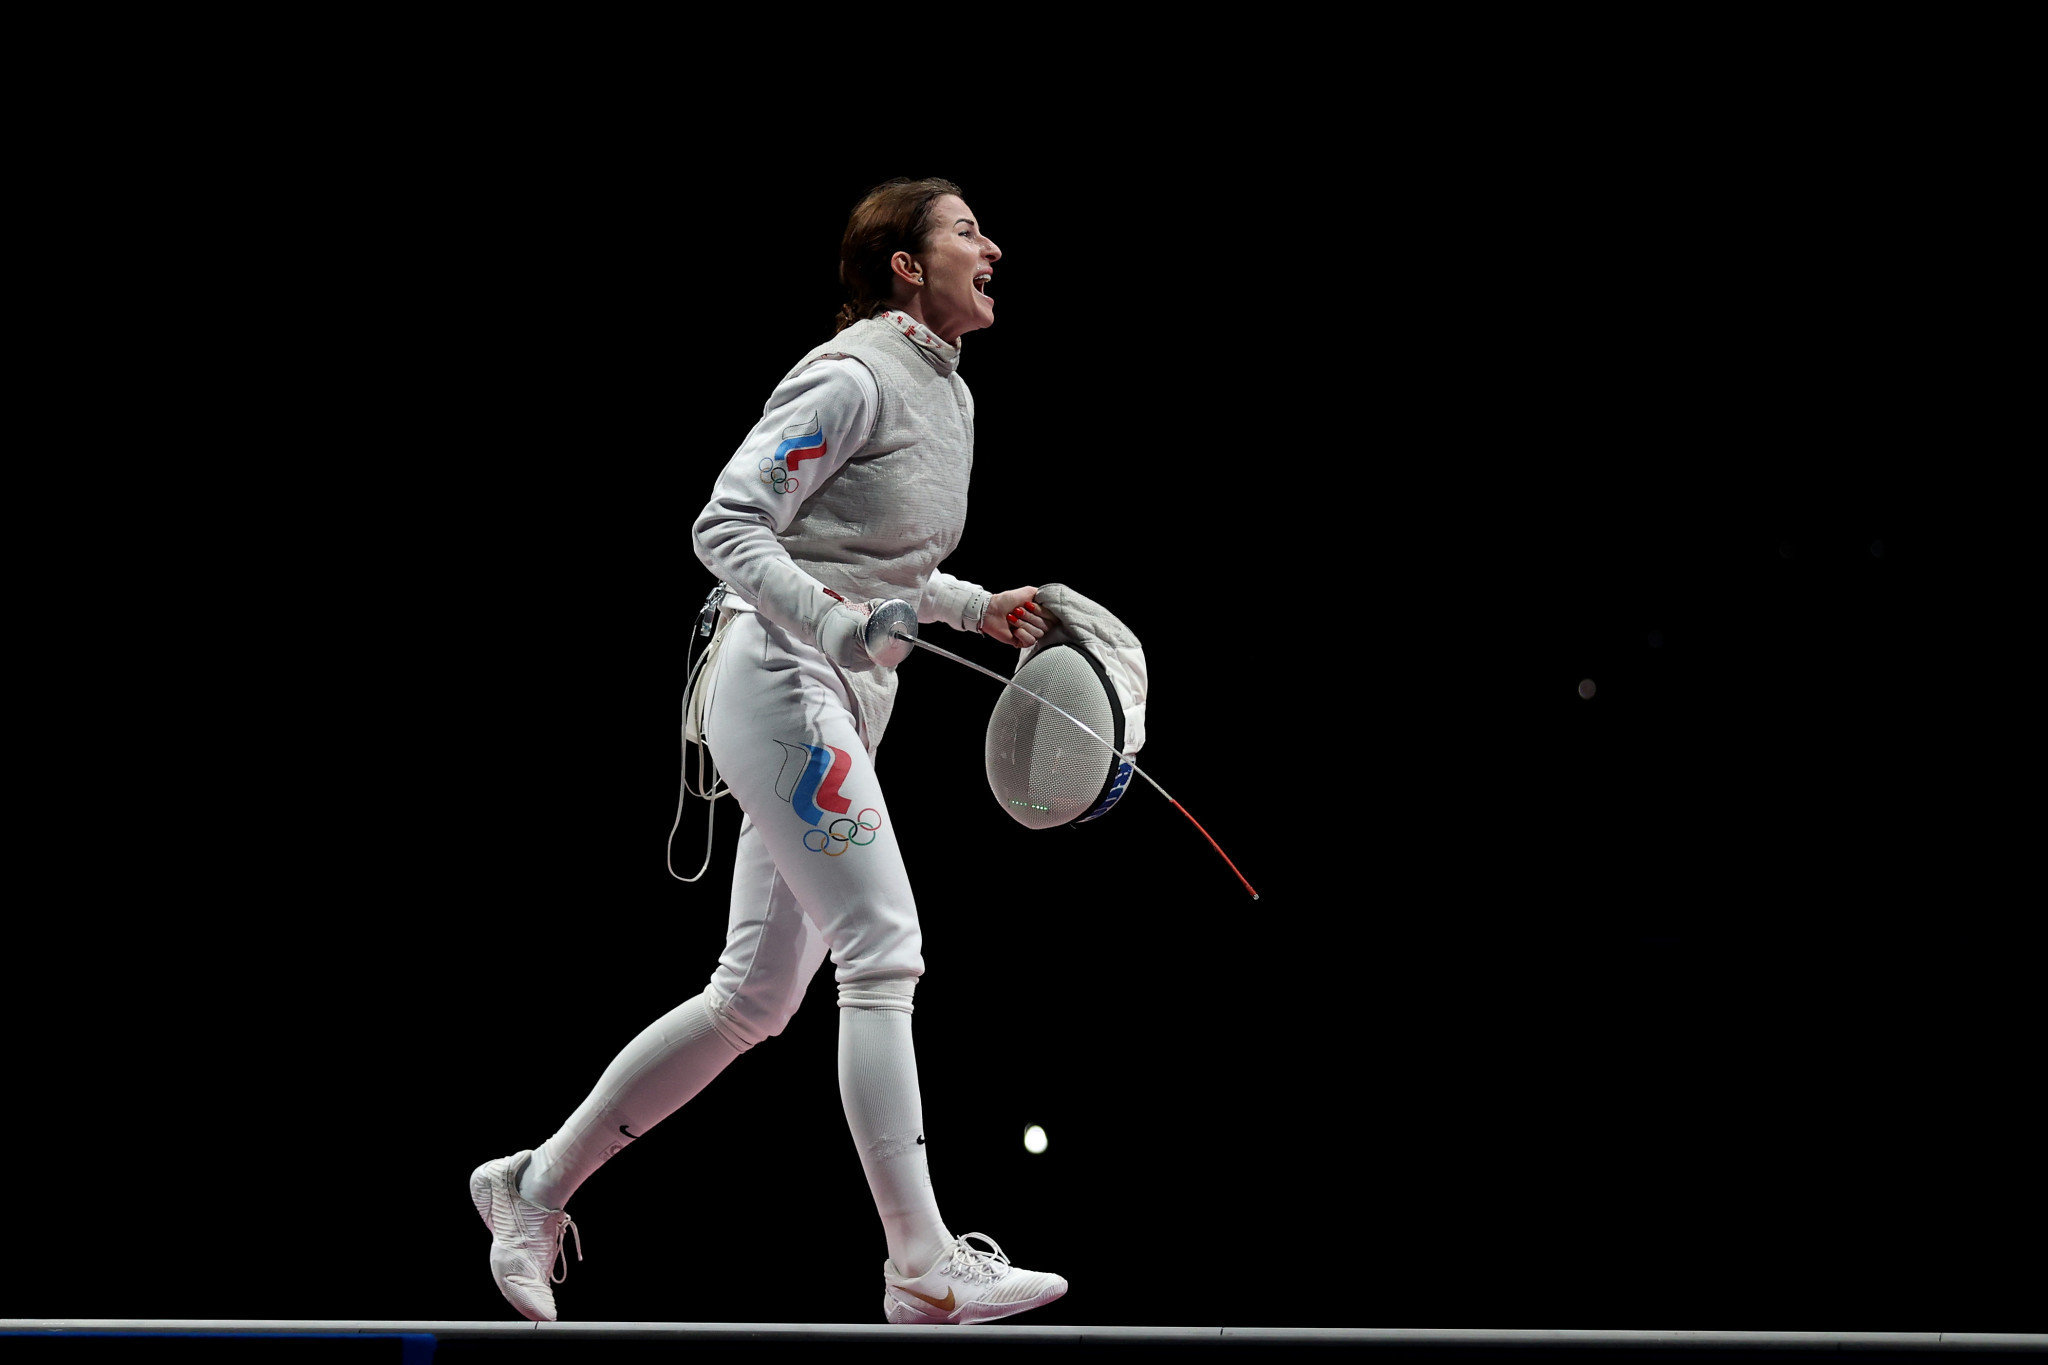 Deriglazova among latest Russian Olympic fencing medallists blocked from FIE events